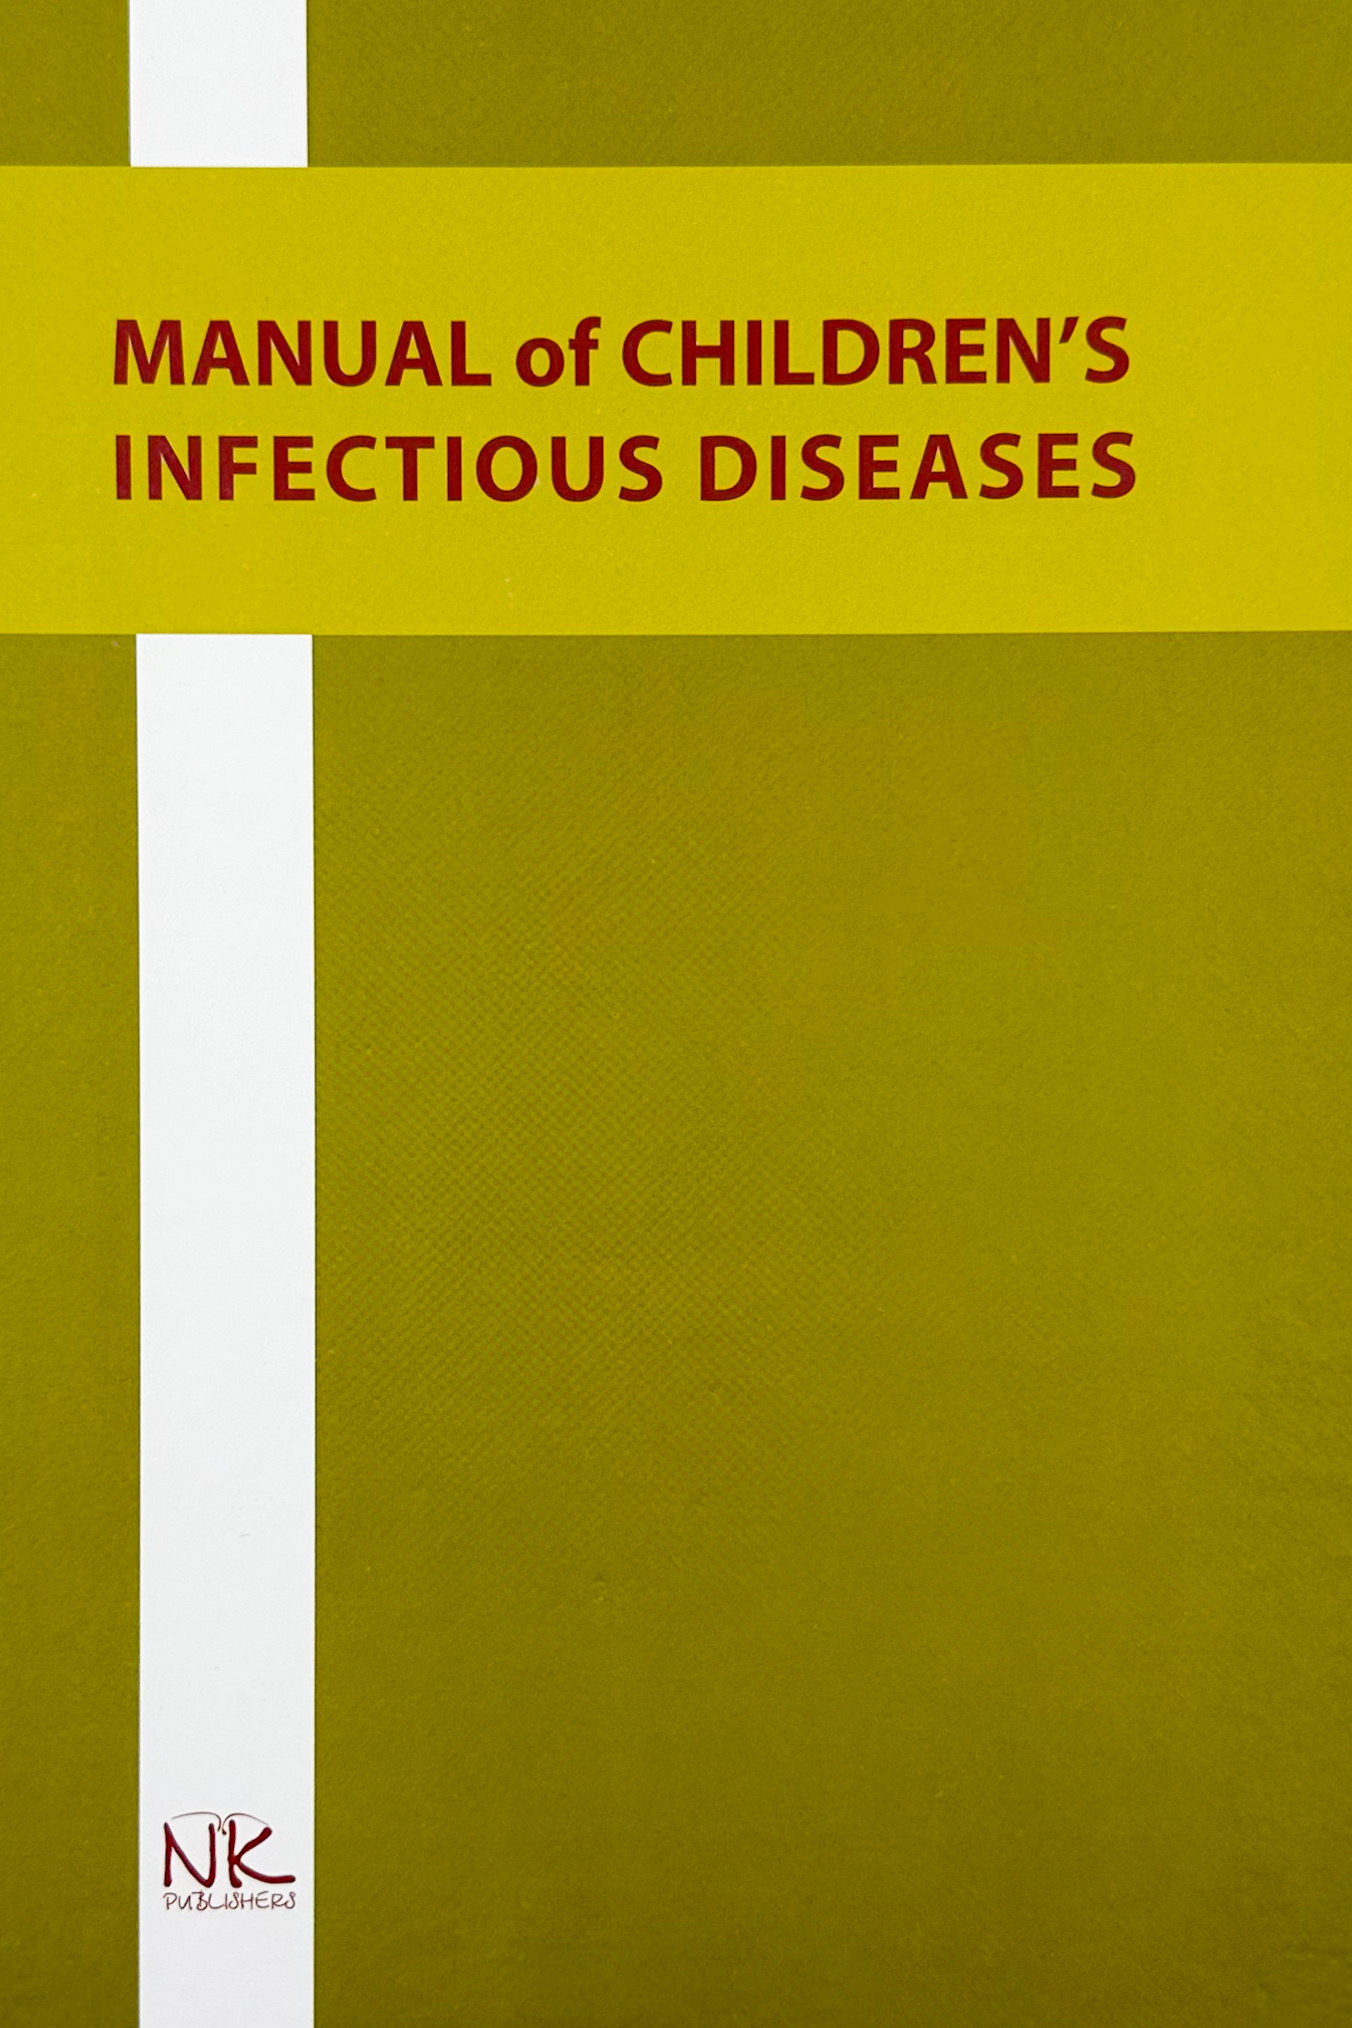 Manual of Children's Infectious Diseases